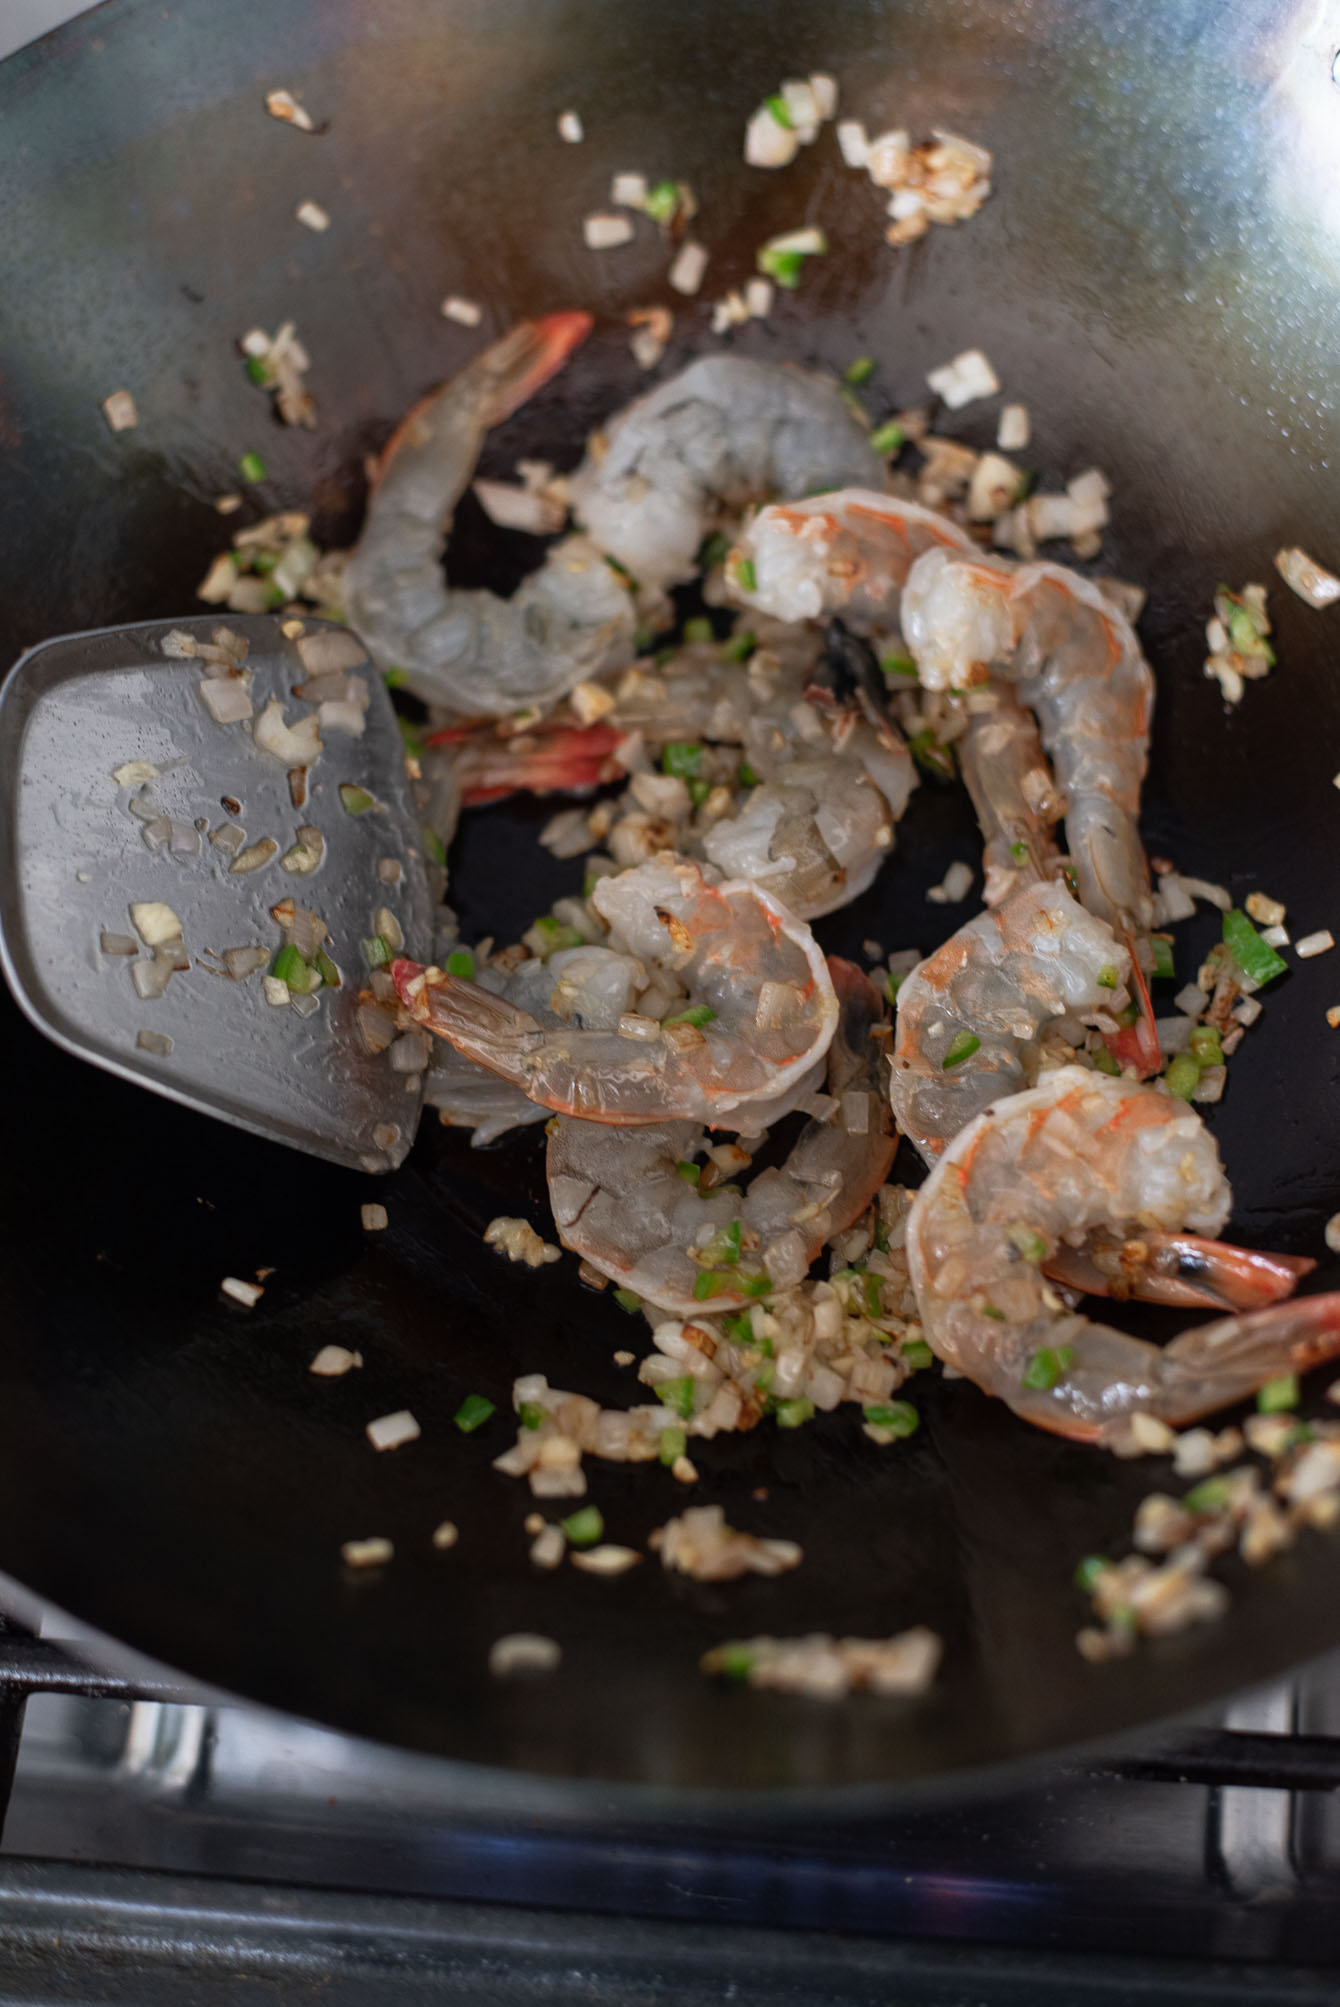 Shrimp is added to a wok to stir fry with shallot and chili mix